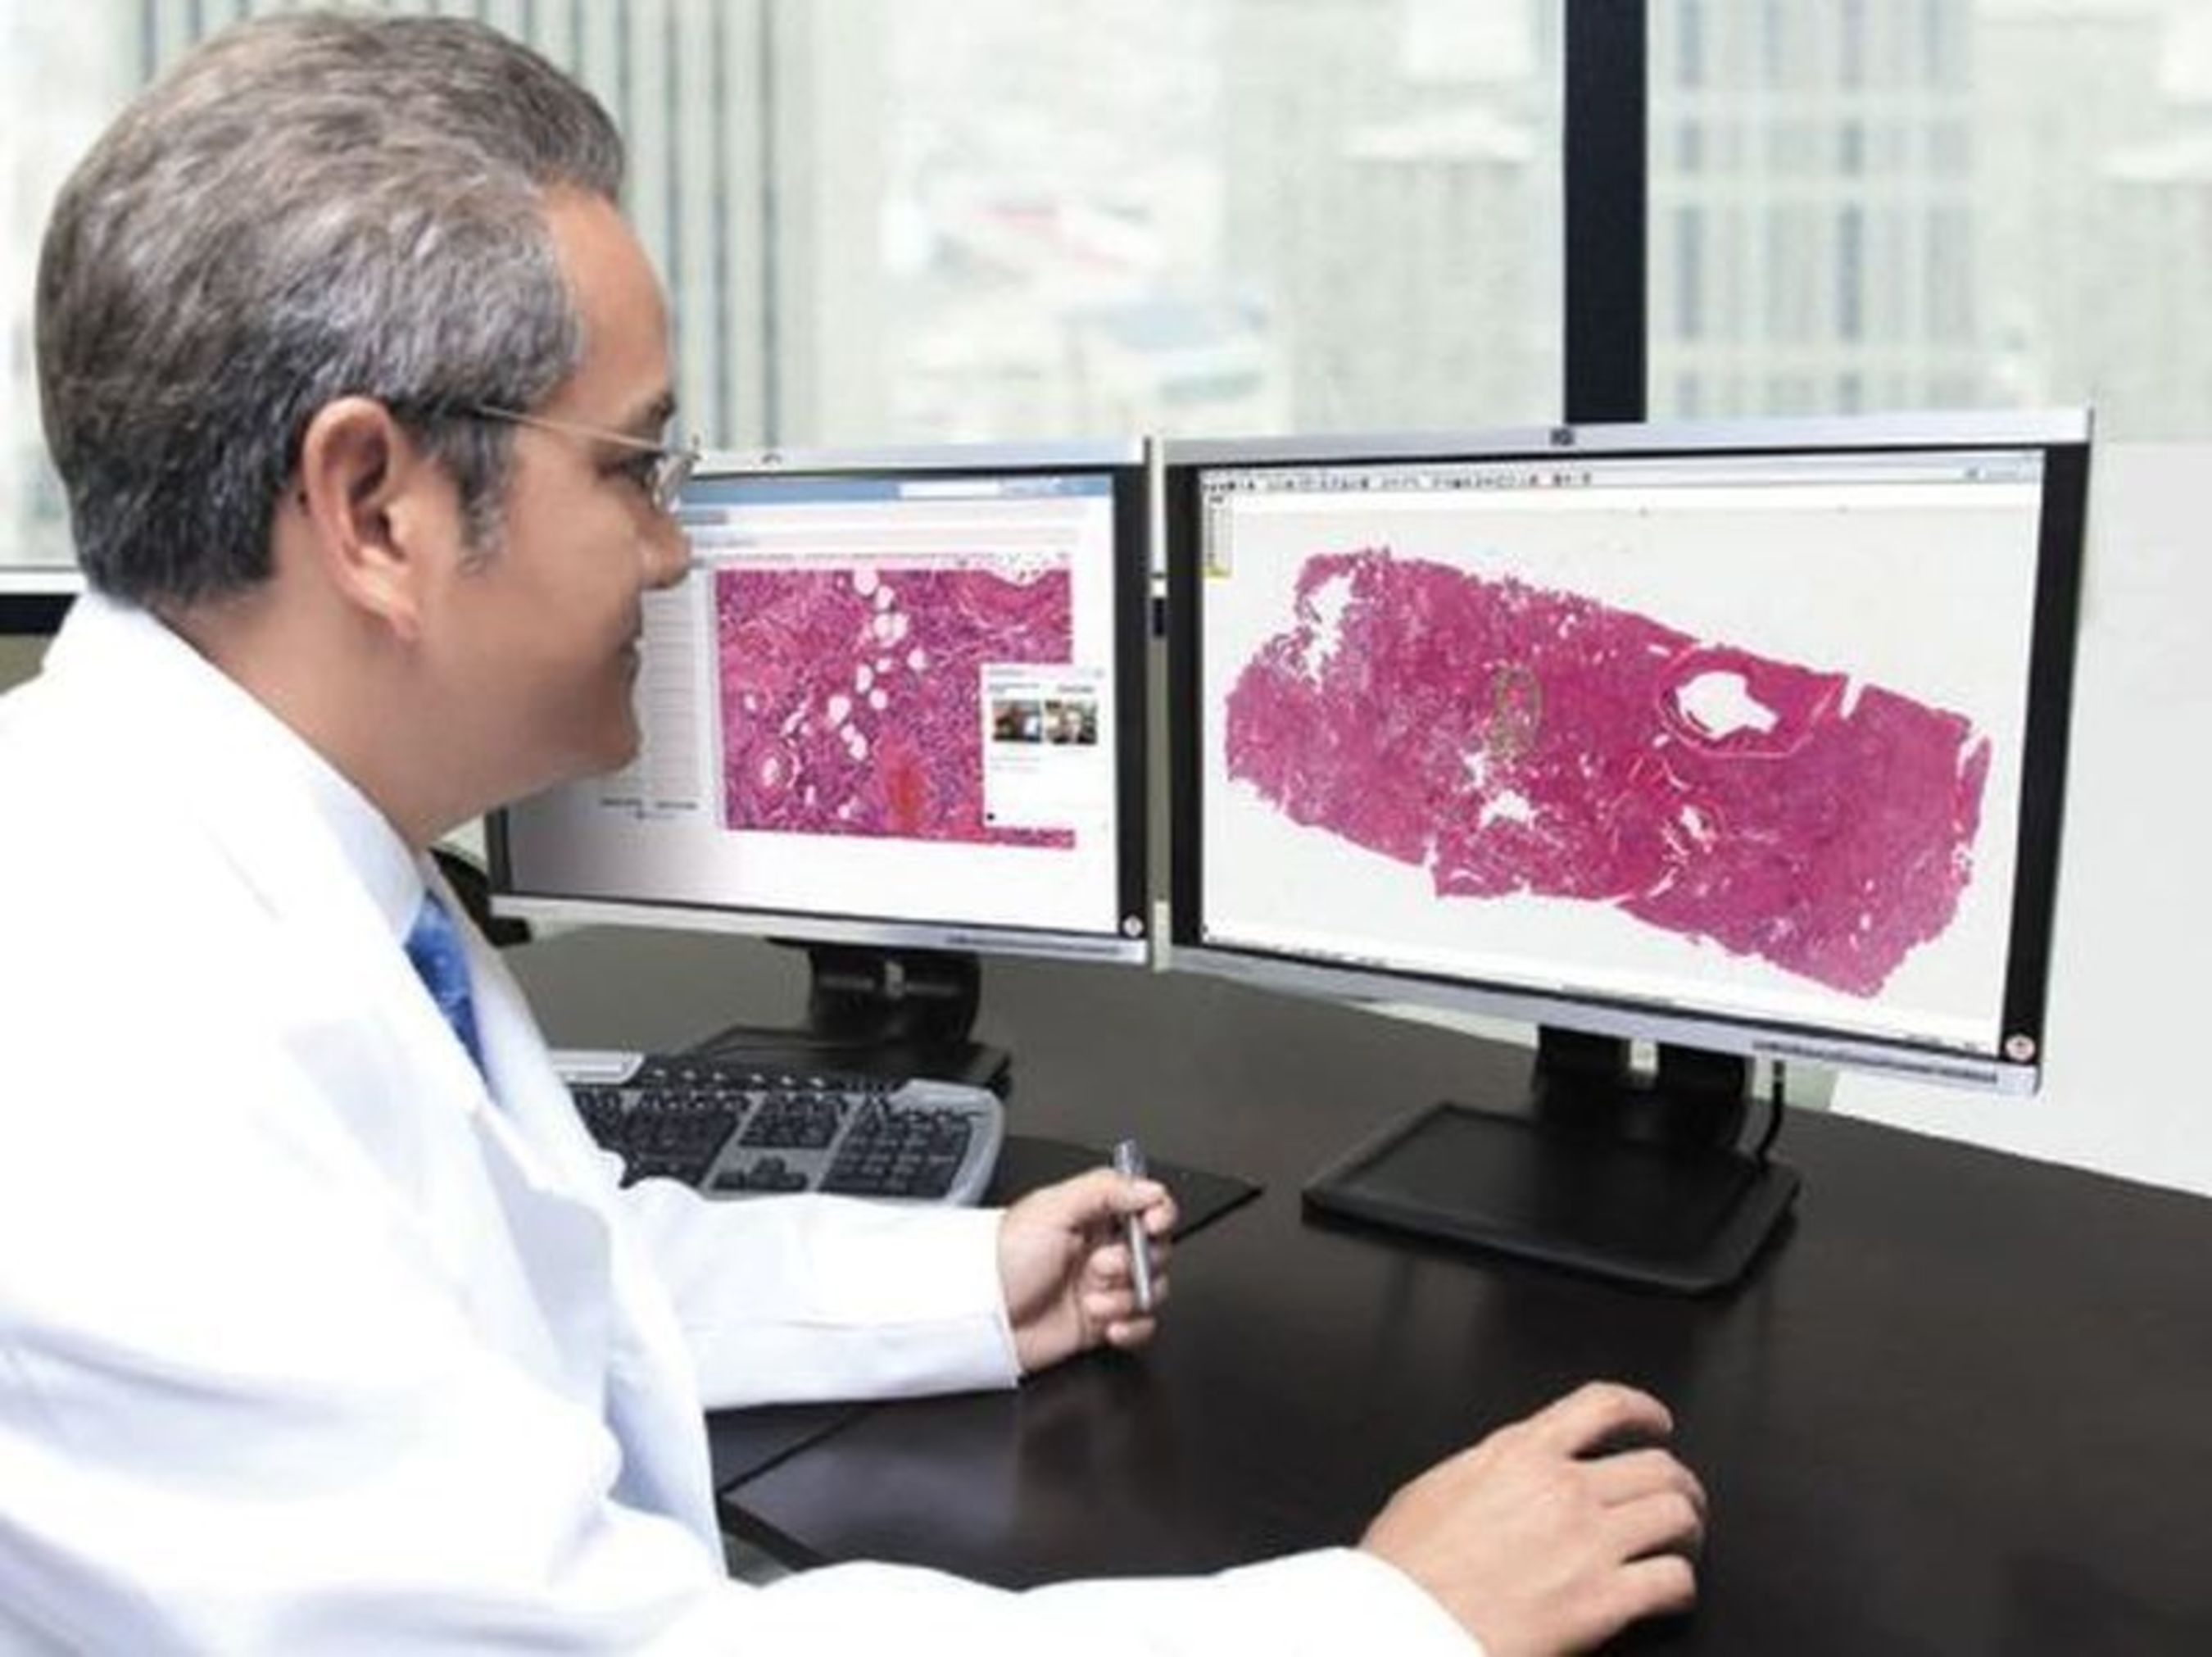 Aperio ePathAccess allows pathologists to securely and quickly upload patient case information and associated digital pathology images to the cloud-based software for rapid consultation, collaboration, and quality assurance. The ISO 27001 certification reflects the high level of security provided by Aperio ePathAccess. (PRNewsFoto/Leica Biosystems)